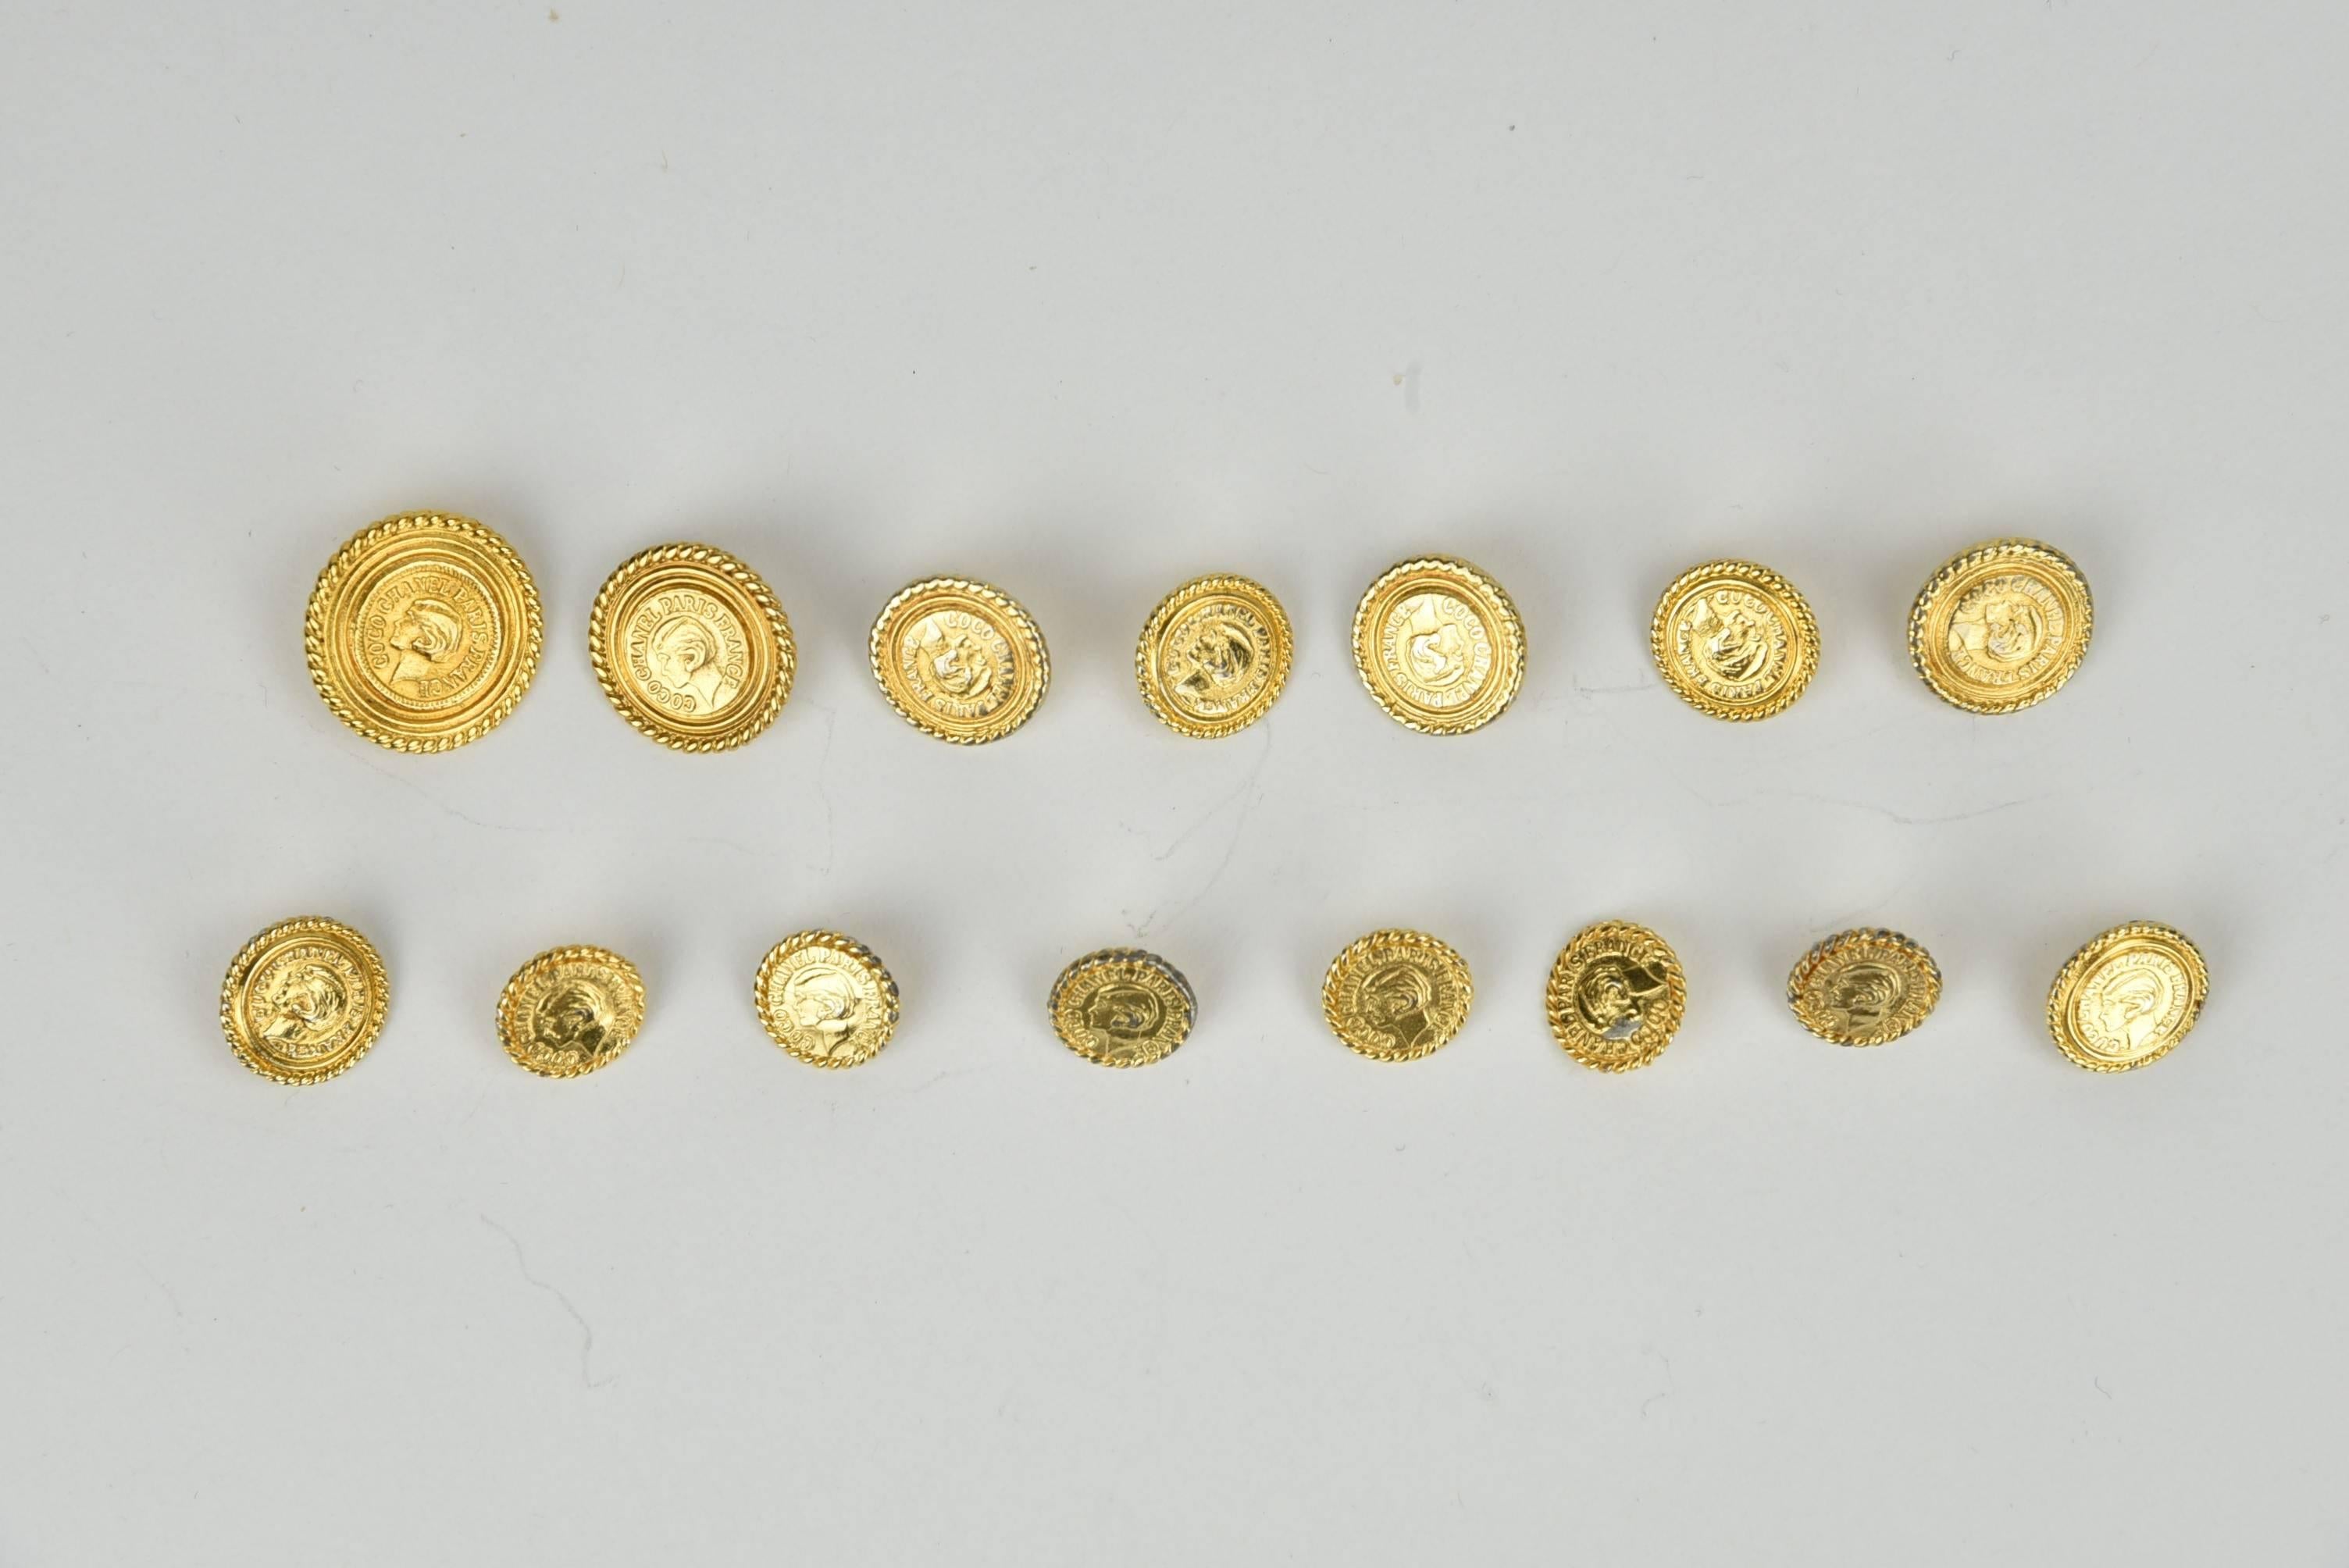 These buttons are the most single iconic symbol of Chanel. In the early 1980's many garments carried these most famous ever gold buttons with a profile of Coco Chanel and the inscription "Coco Chanel Paris France".
There are:  (1)